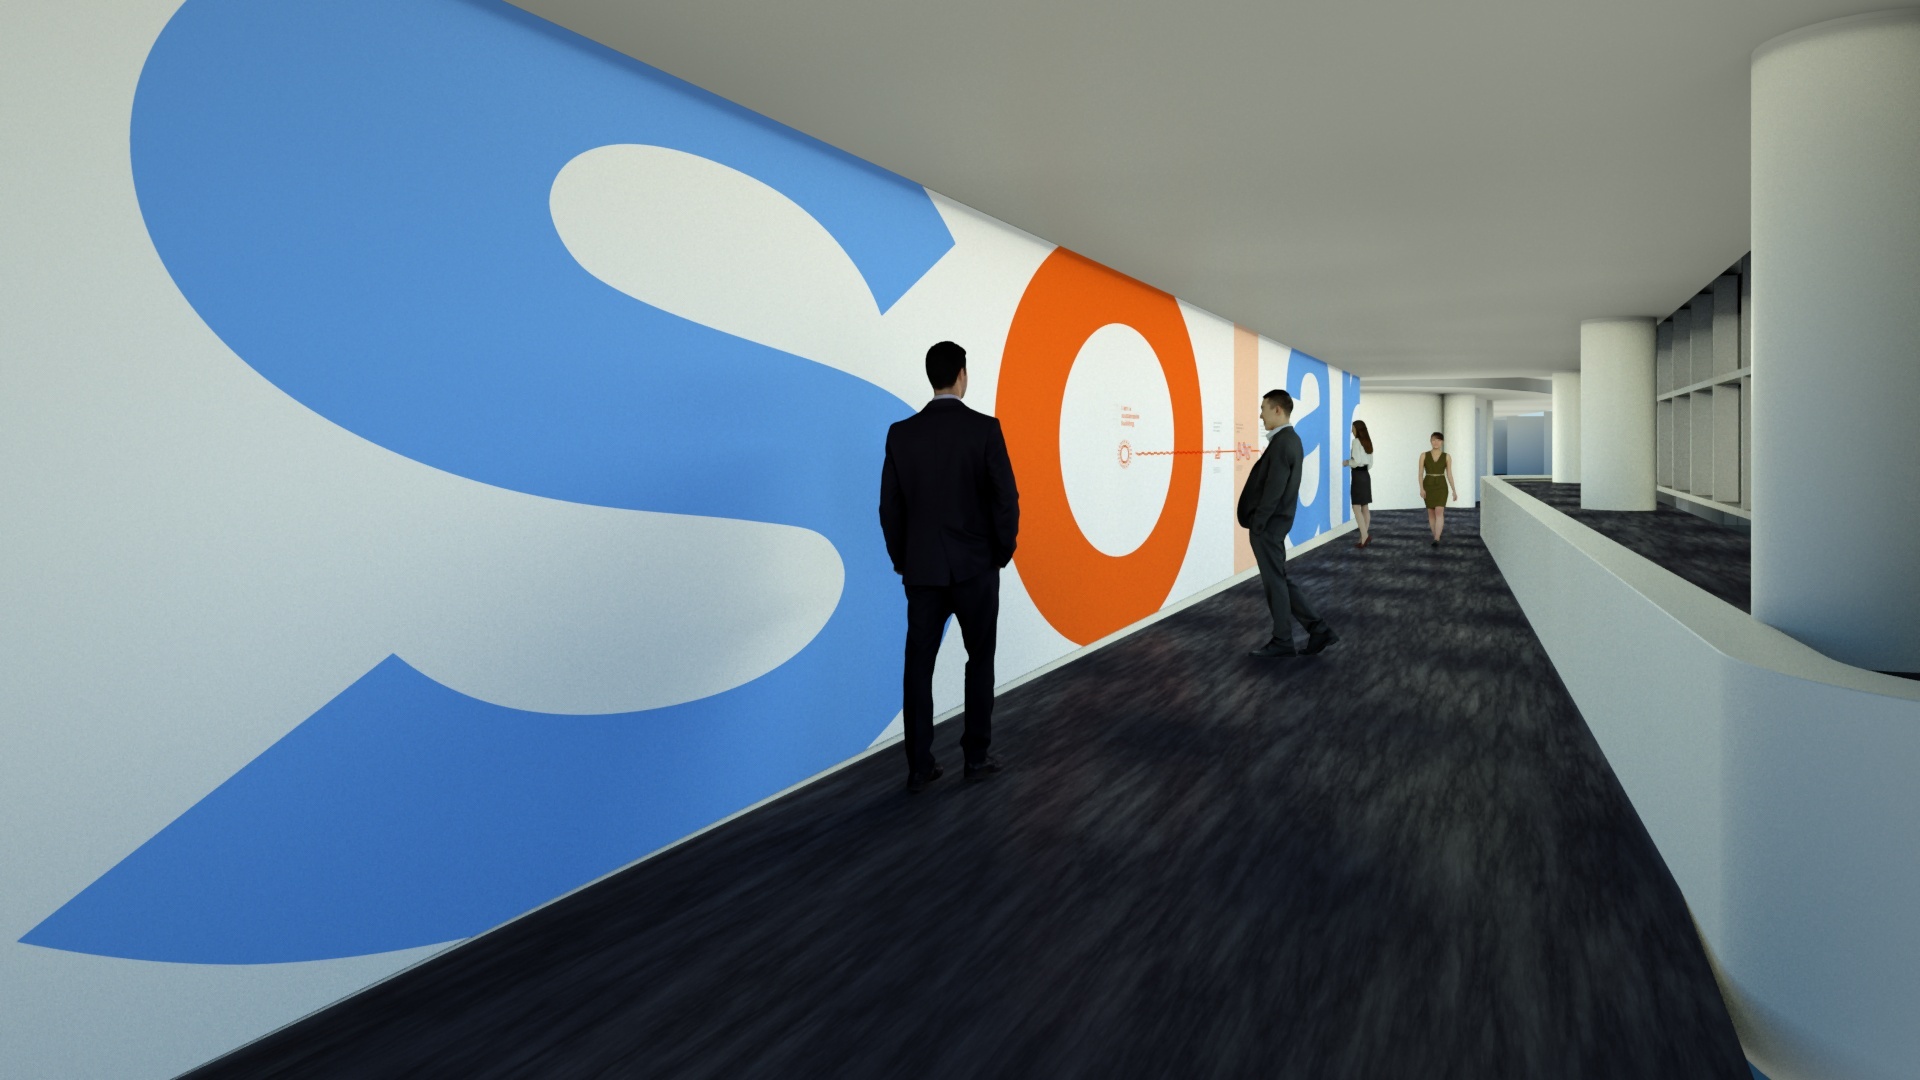 Render of people standing in hallway with the word "solar" on wall in blue and orange text